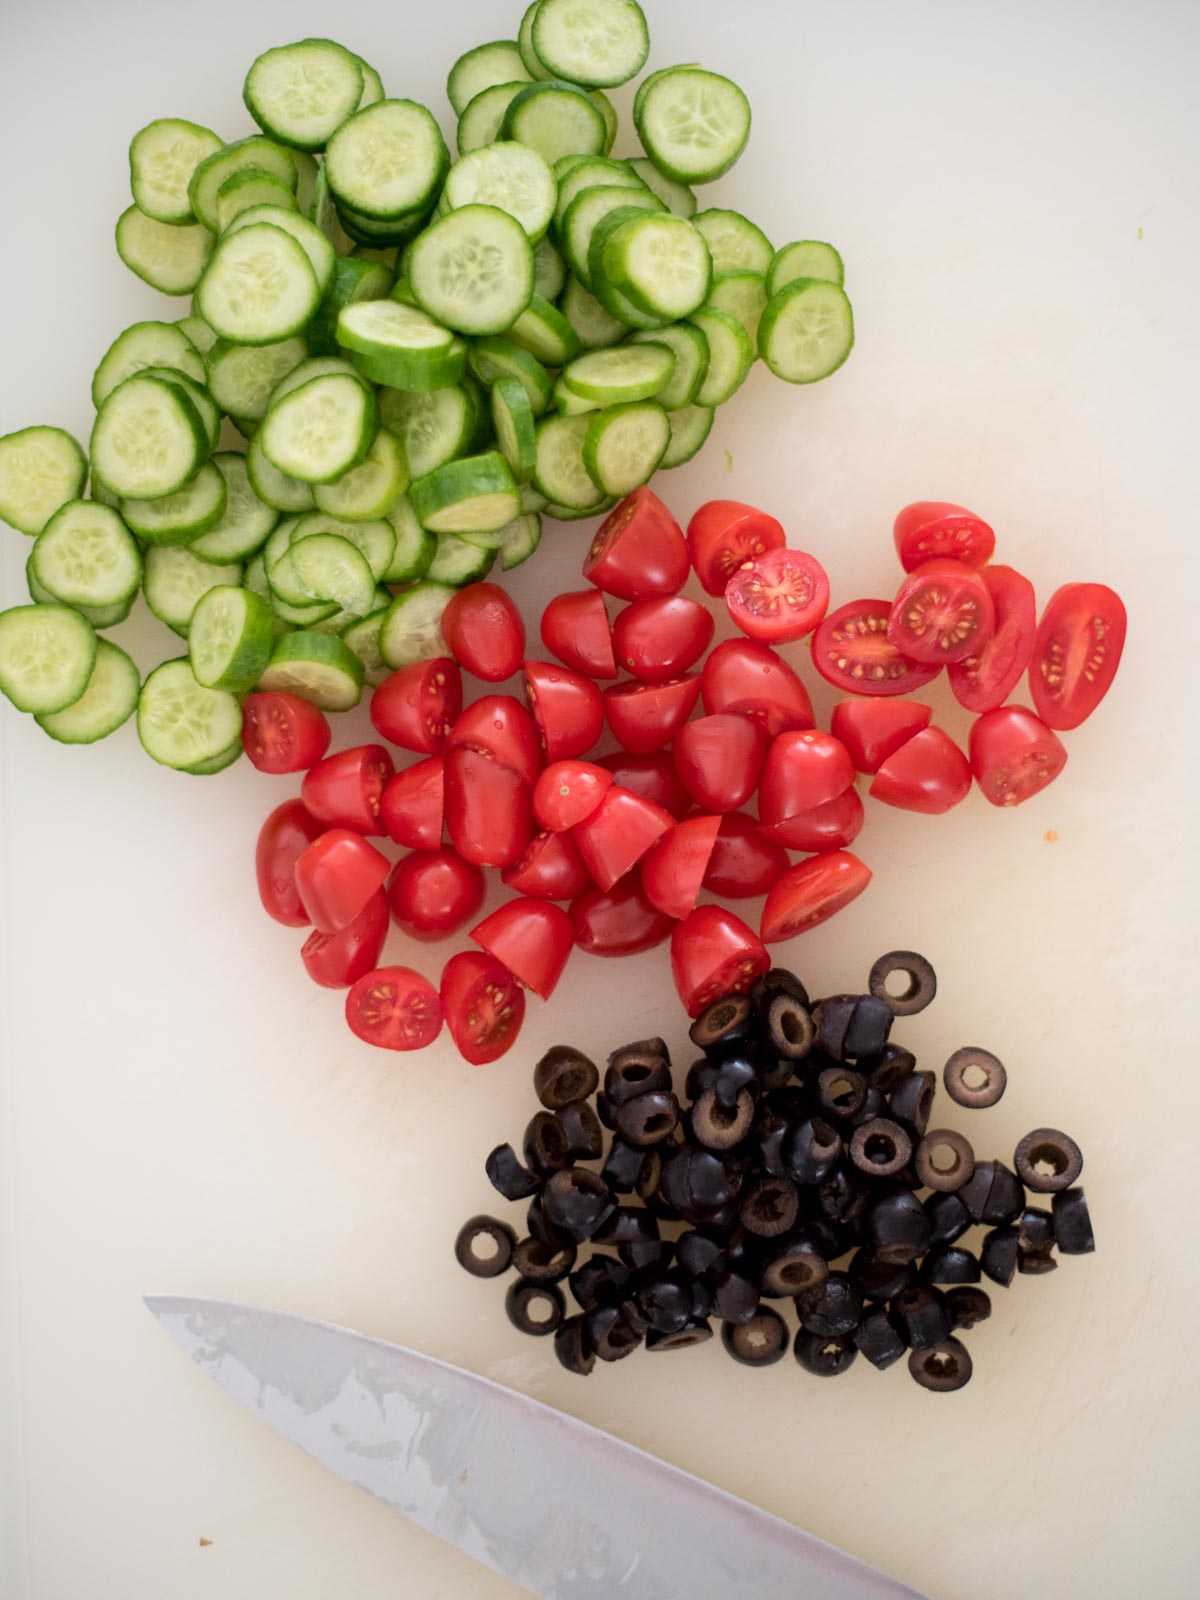 chopped cucumber, olives, and tomatoes on a cutting board with a knife